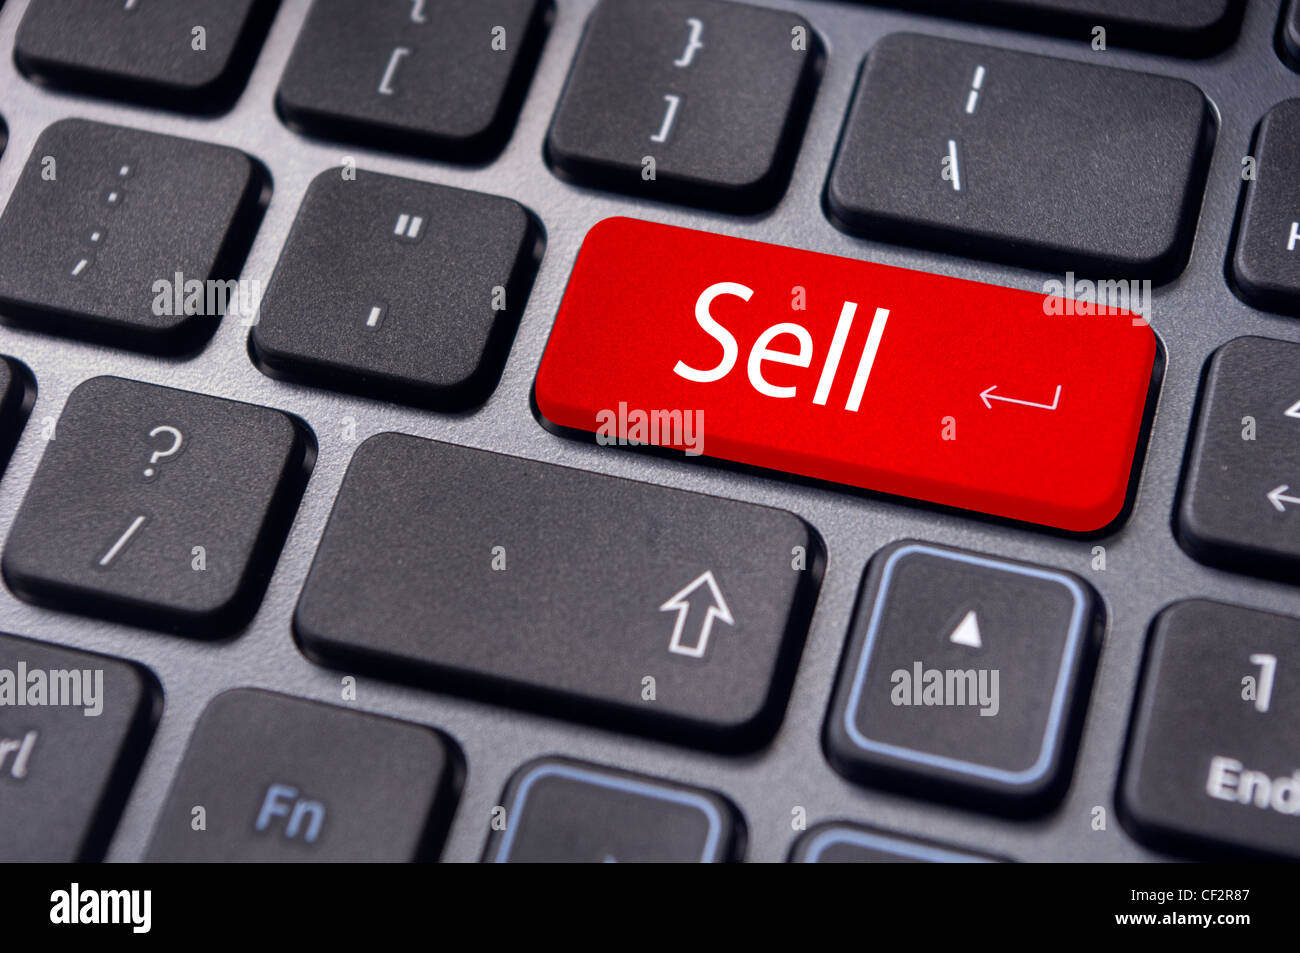 sell message on keyboard, to sell something or sell concept for stock market. Stock Photo